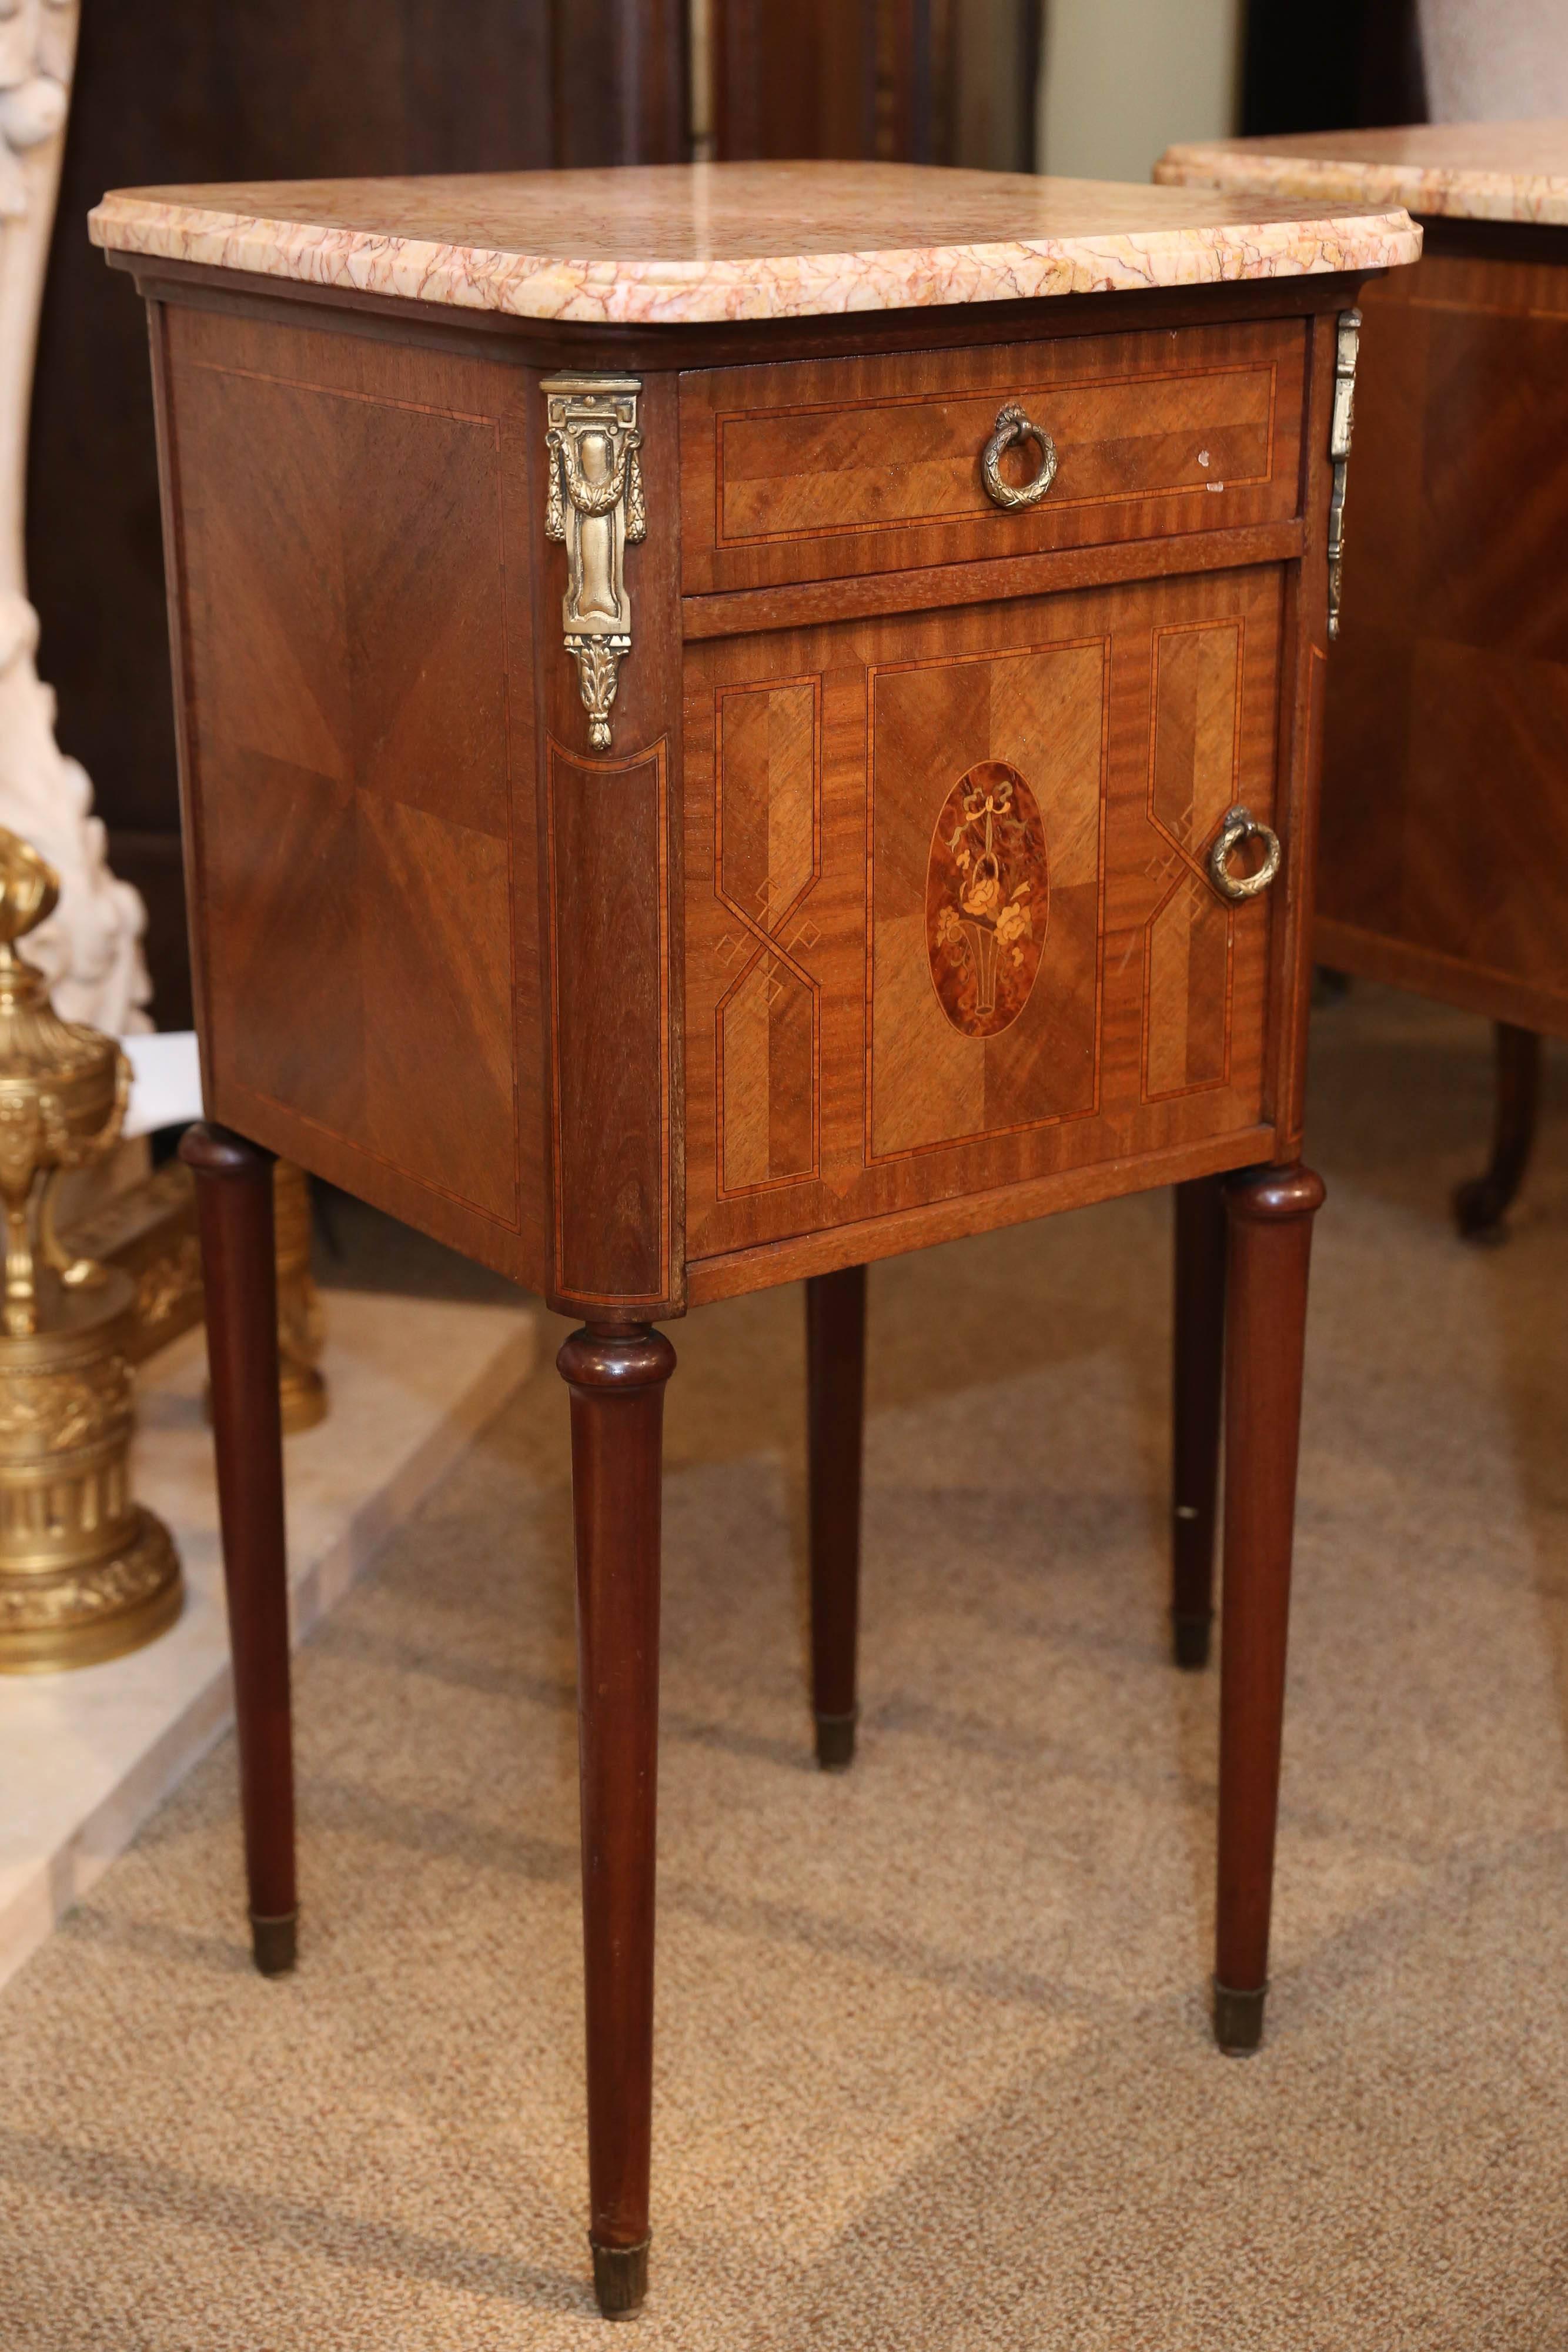 Bedside cabinets with fine inlay, marquetry cameo depicting.
Flowers in a basket, ormolu mounts.
Various woods including kingwood, satinwood and walnut.